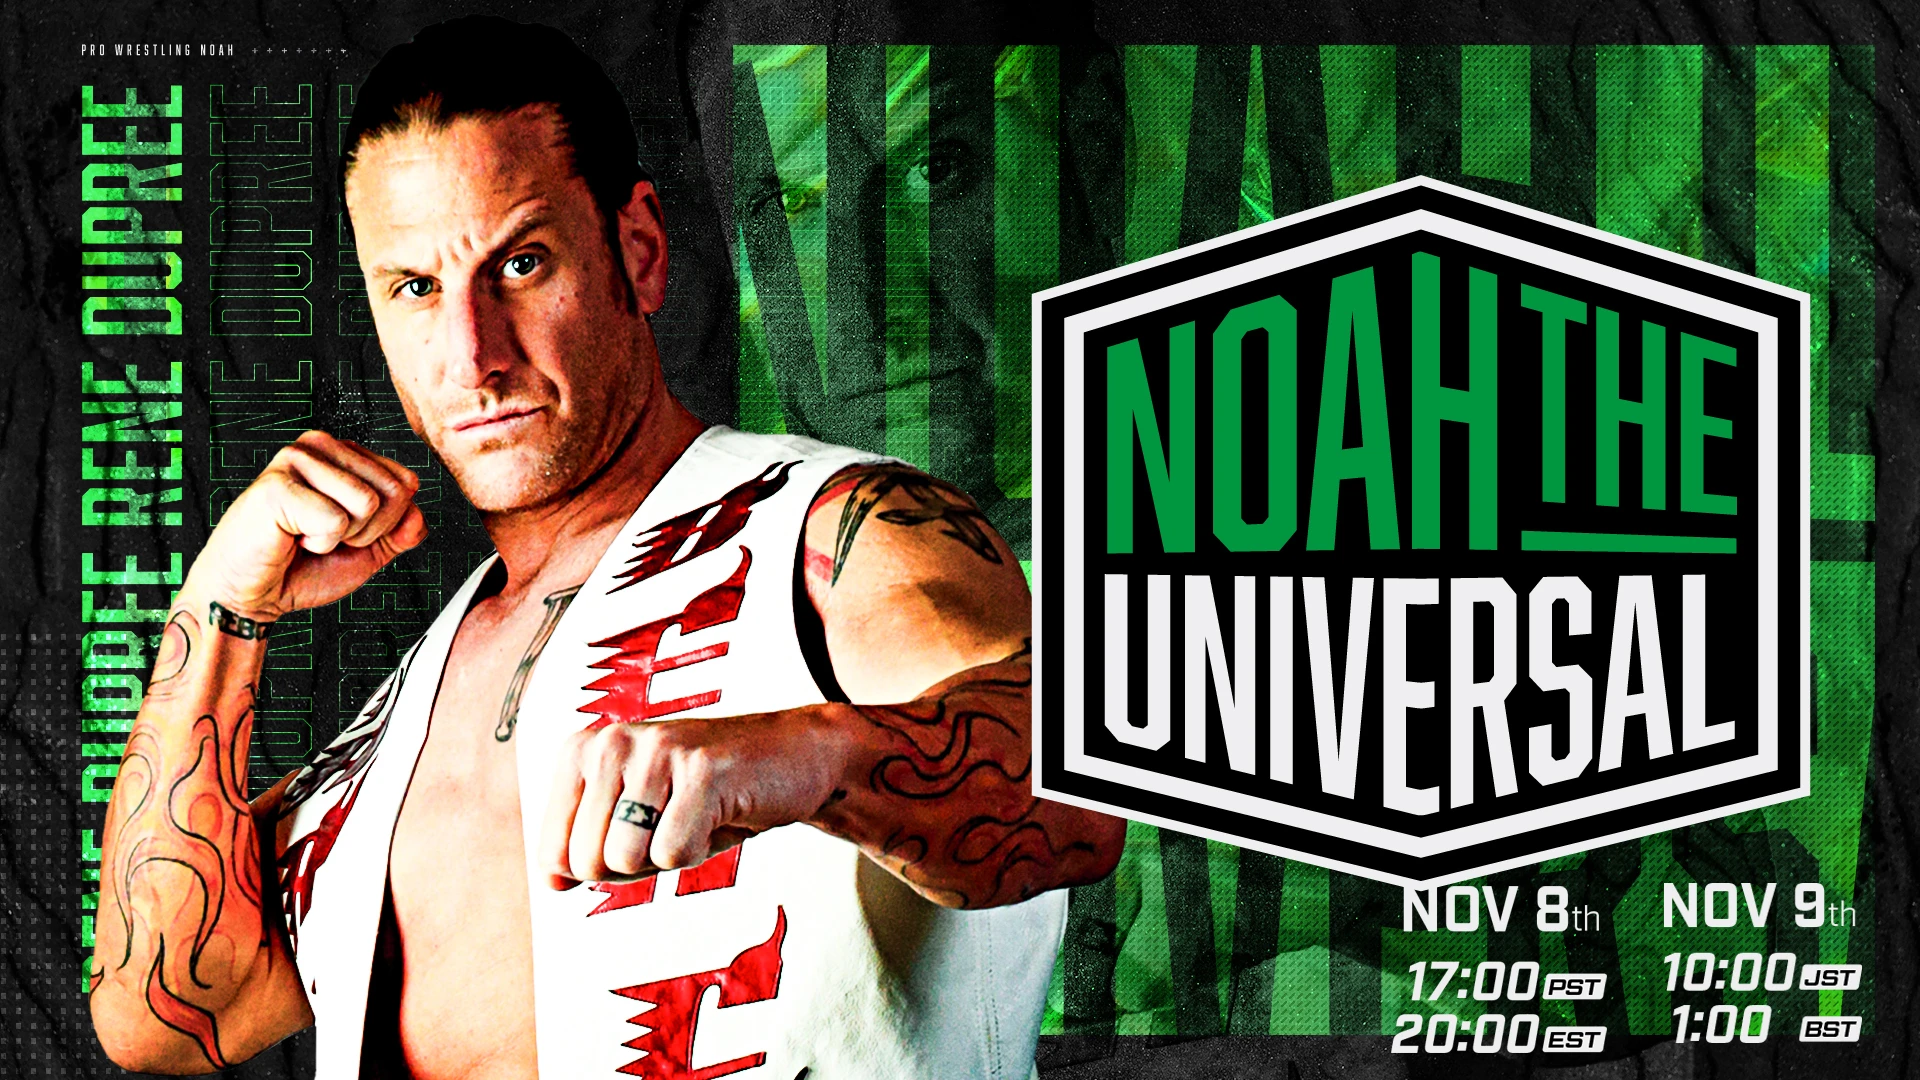 NOAH The Universal, a groundbreaking new event series which launched on Wrestle Universe in September, will make its anticipated return on Tuesday 9 November from NOAH Arena.